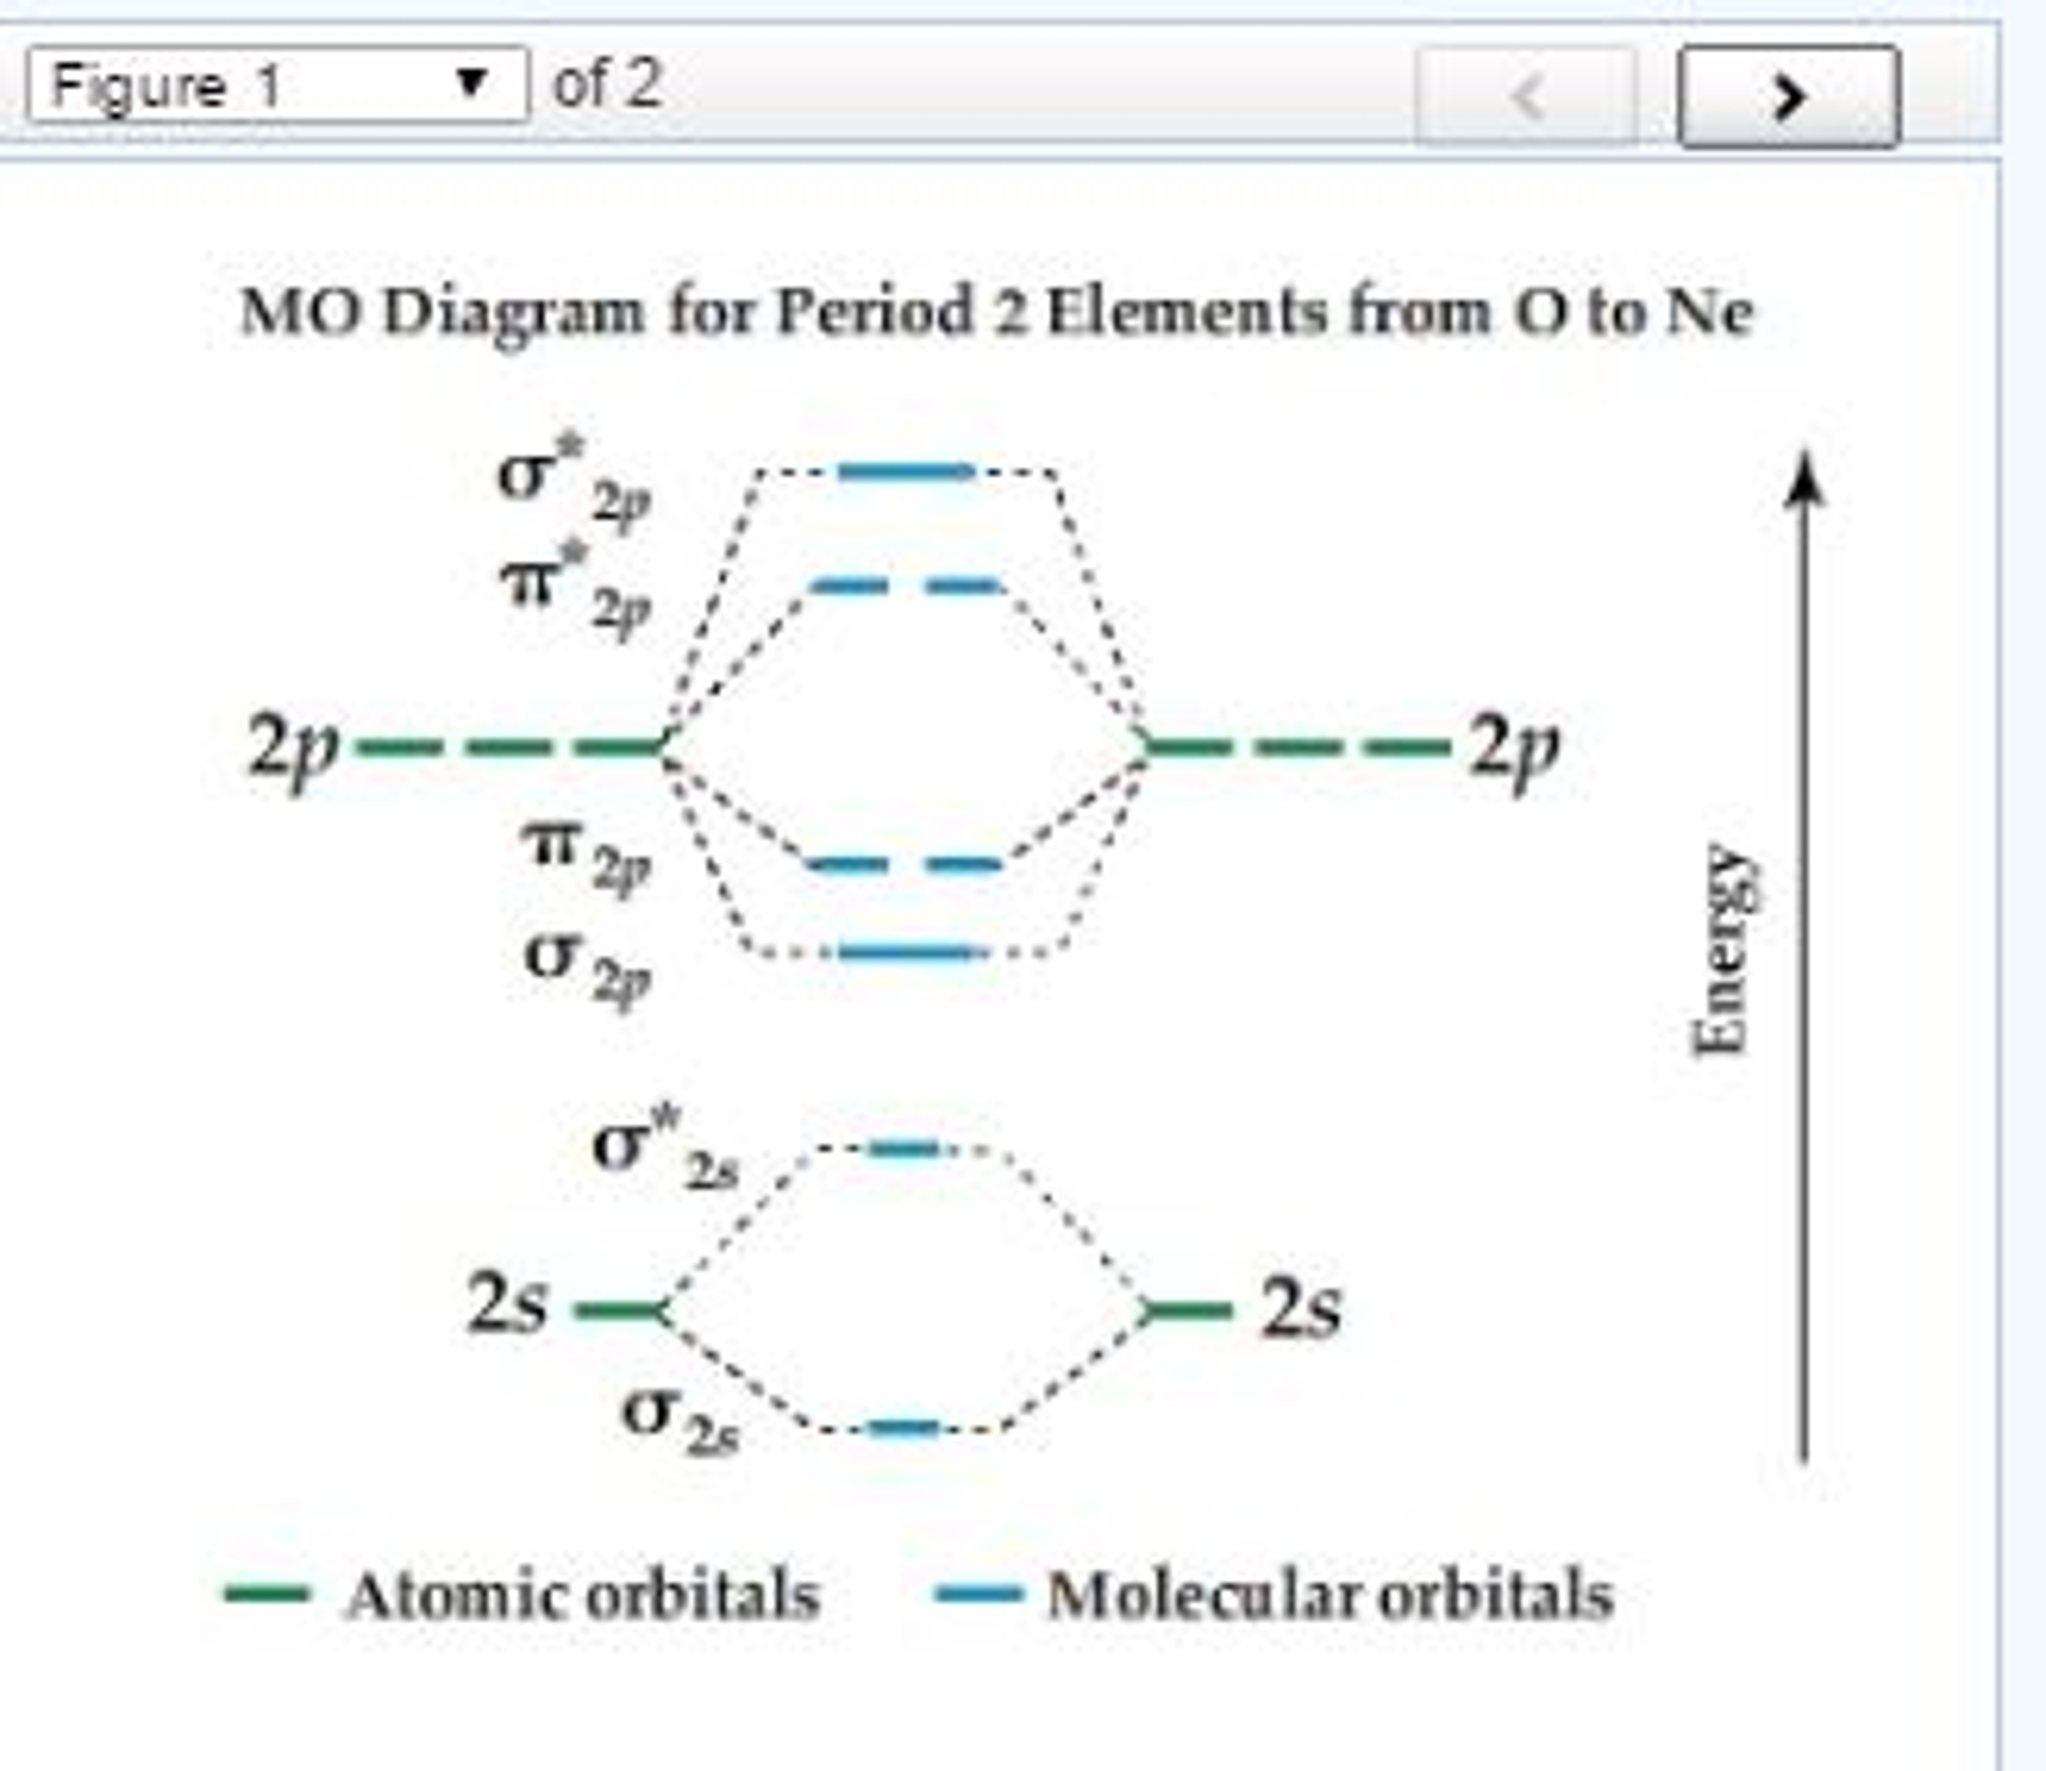 Orbital Diagram For Fluorine Solved Mo Diagram For Period 2 Elements From O To Ne Arra